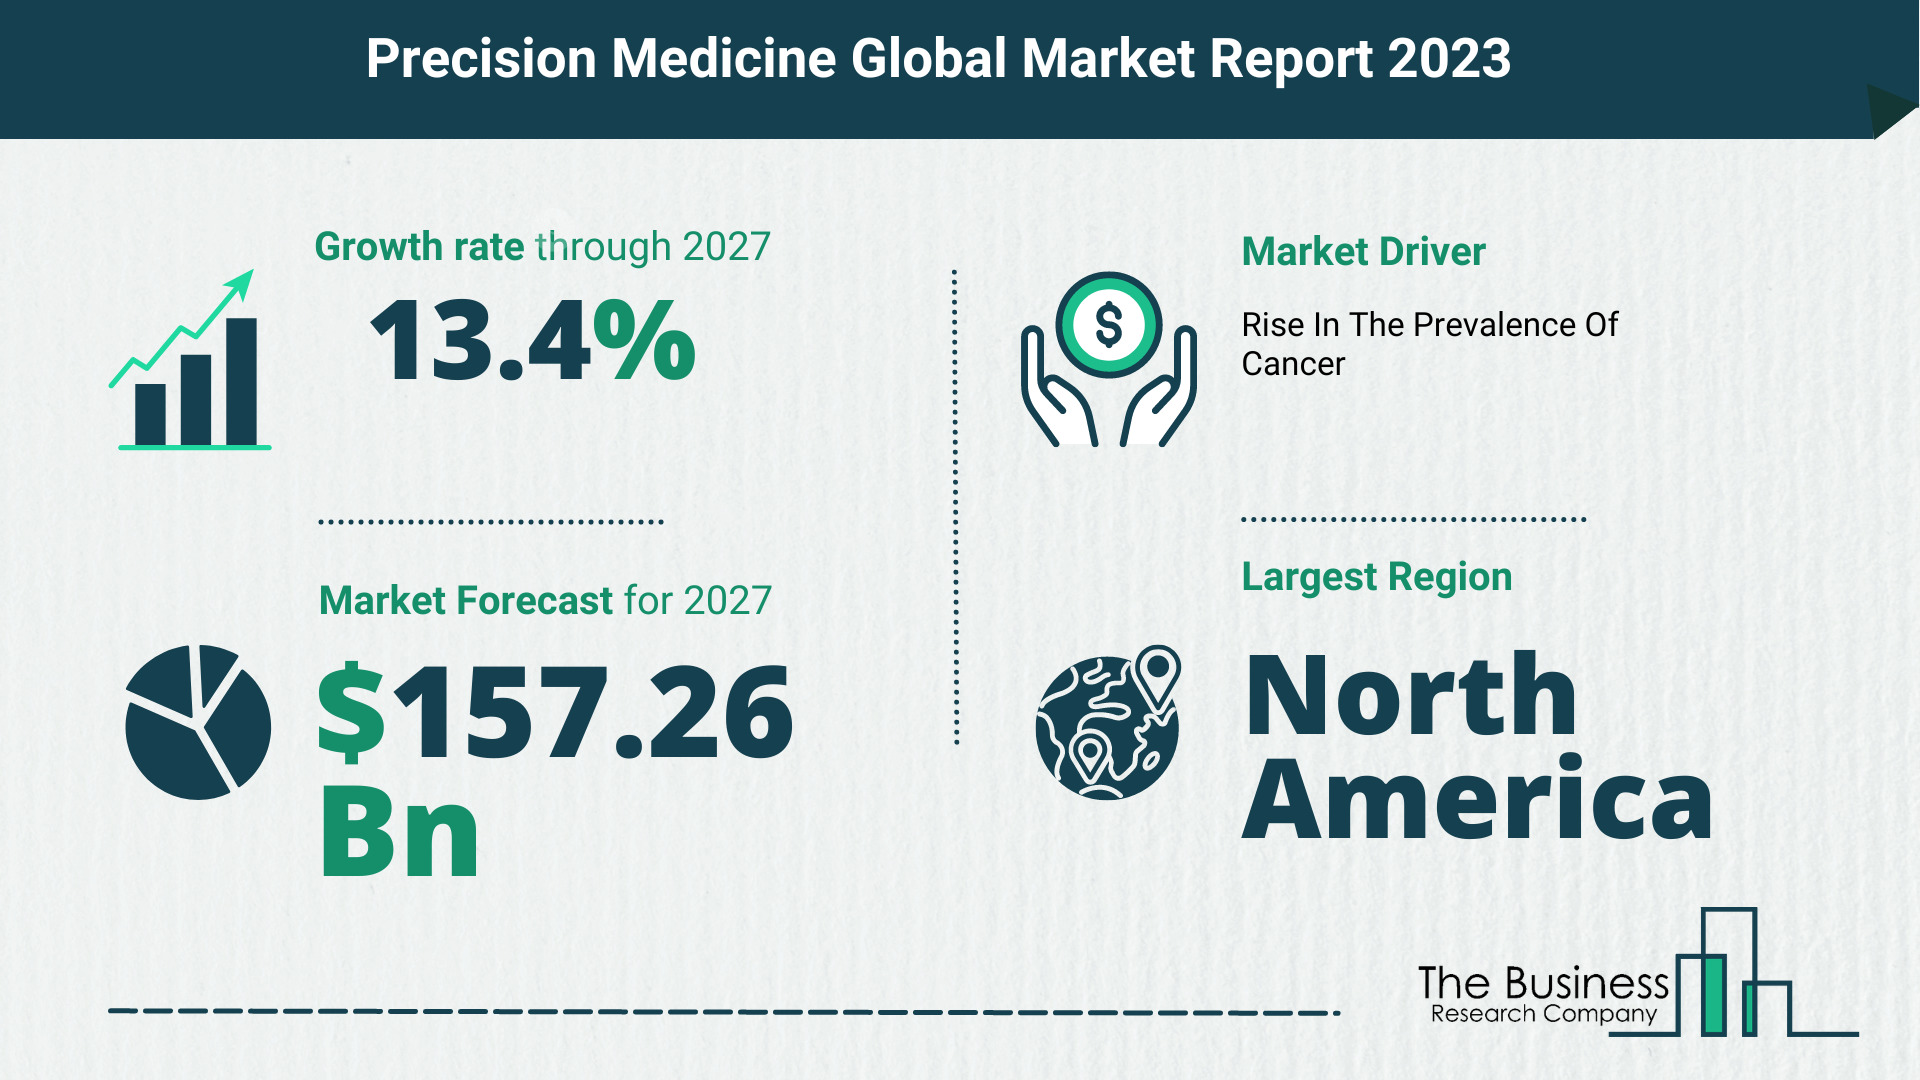 What Will The Precision Medicine Market Look Like In 2023?